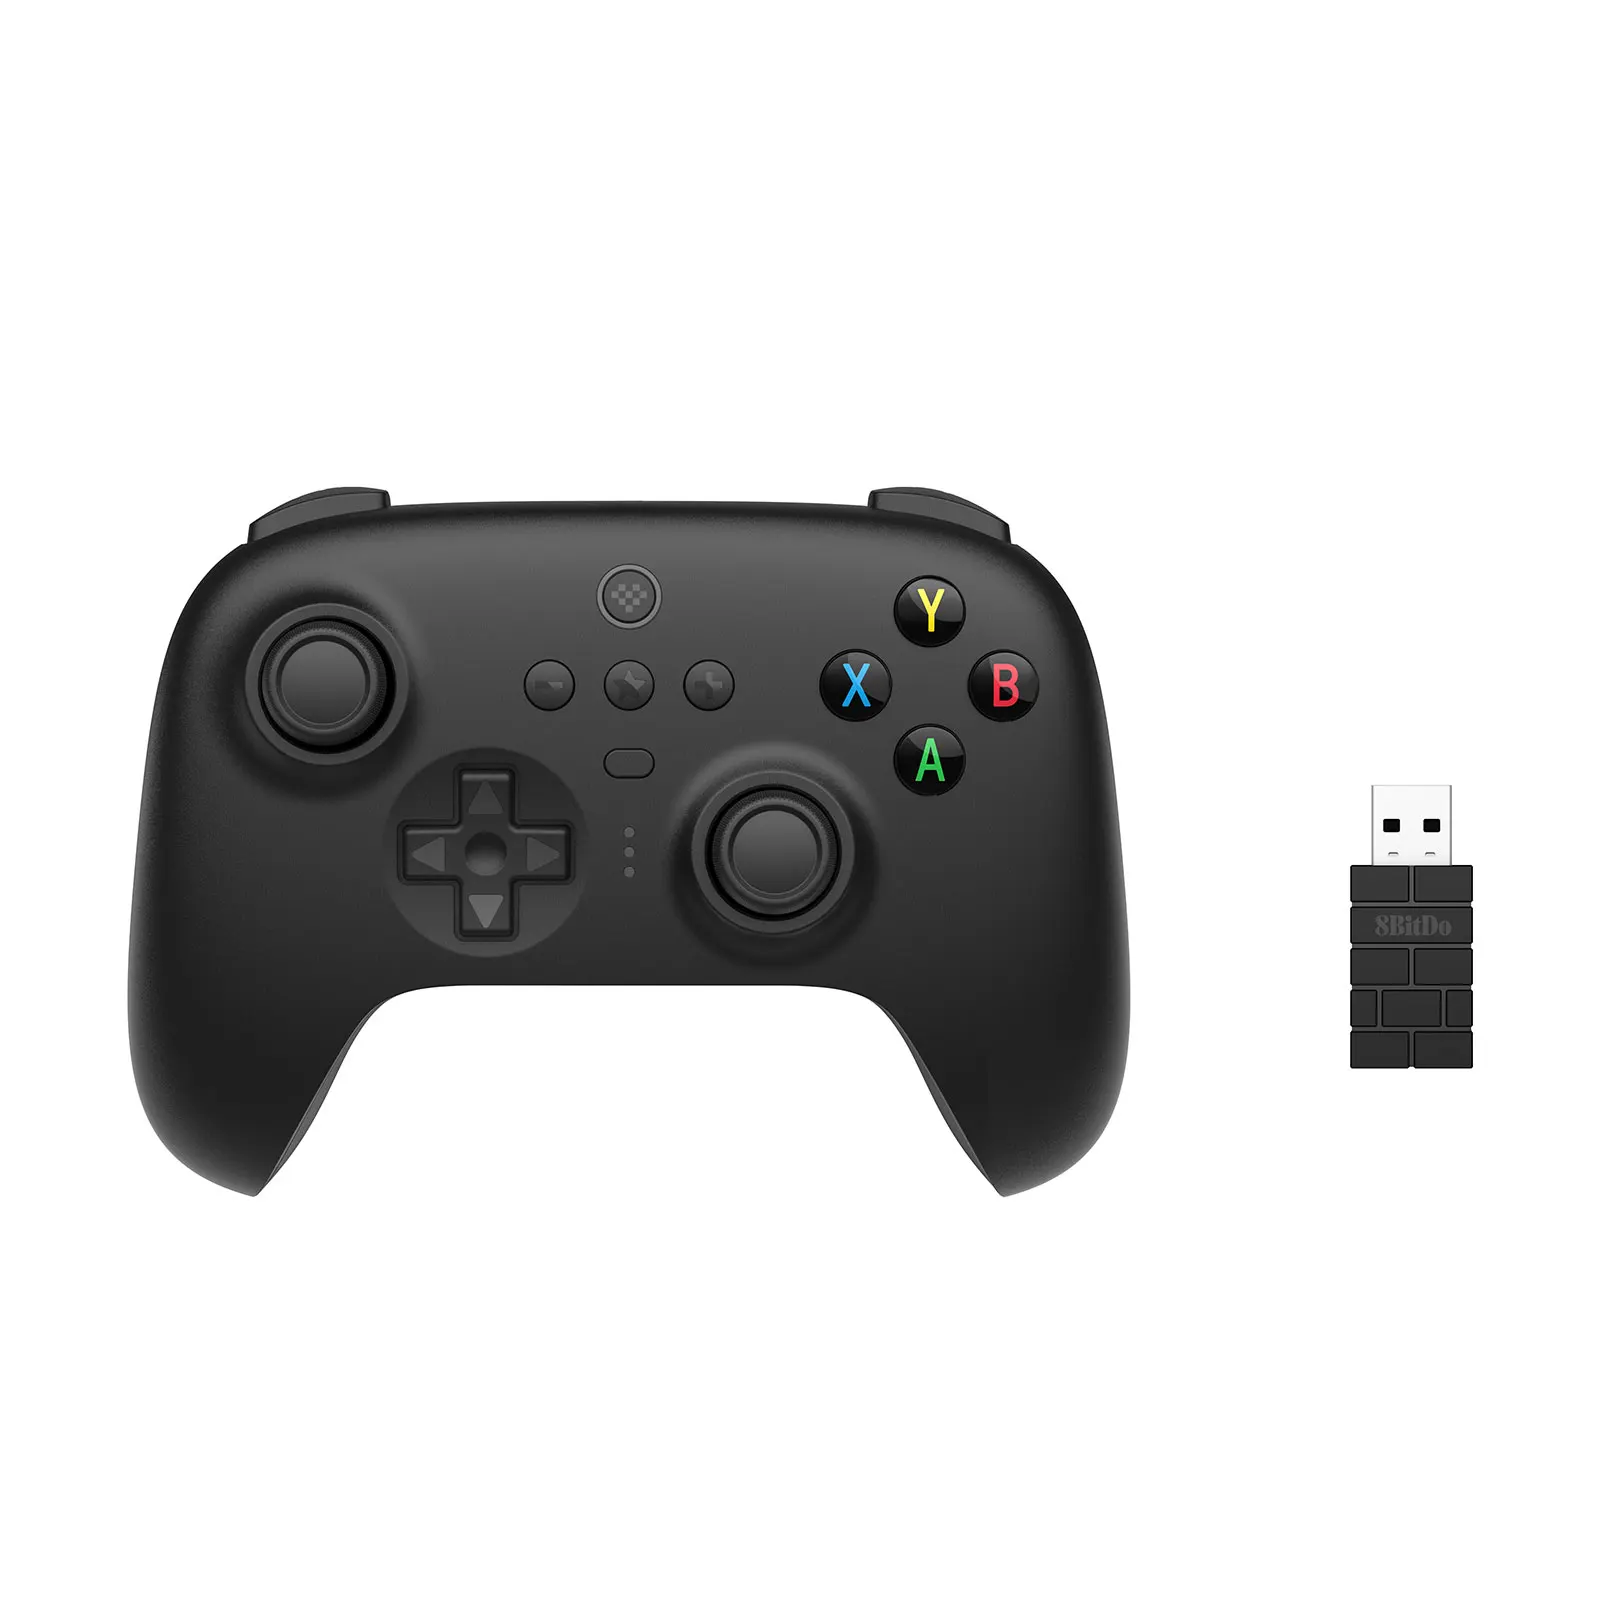 nieve extremidades Hombre rico 8bitdo - Ultimate Wireless 2.4g Gaming Controller - Wireless 2.4g Gaming -  Aliexpress